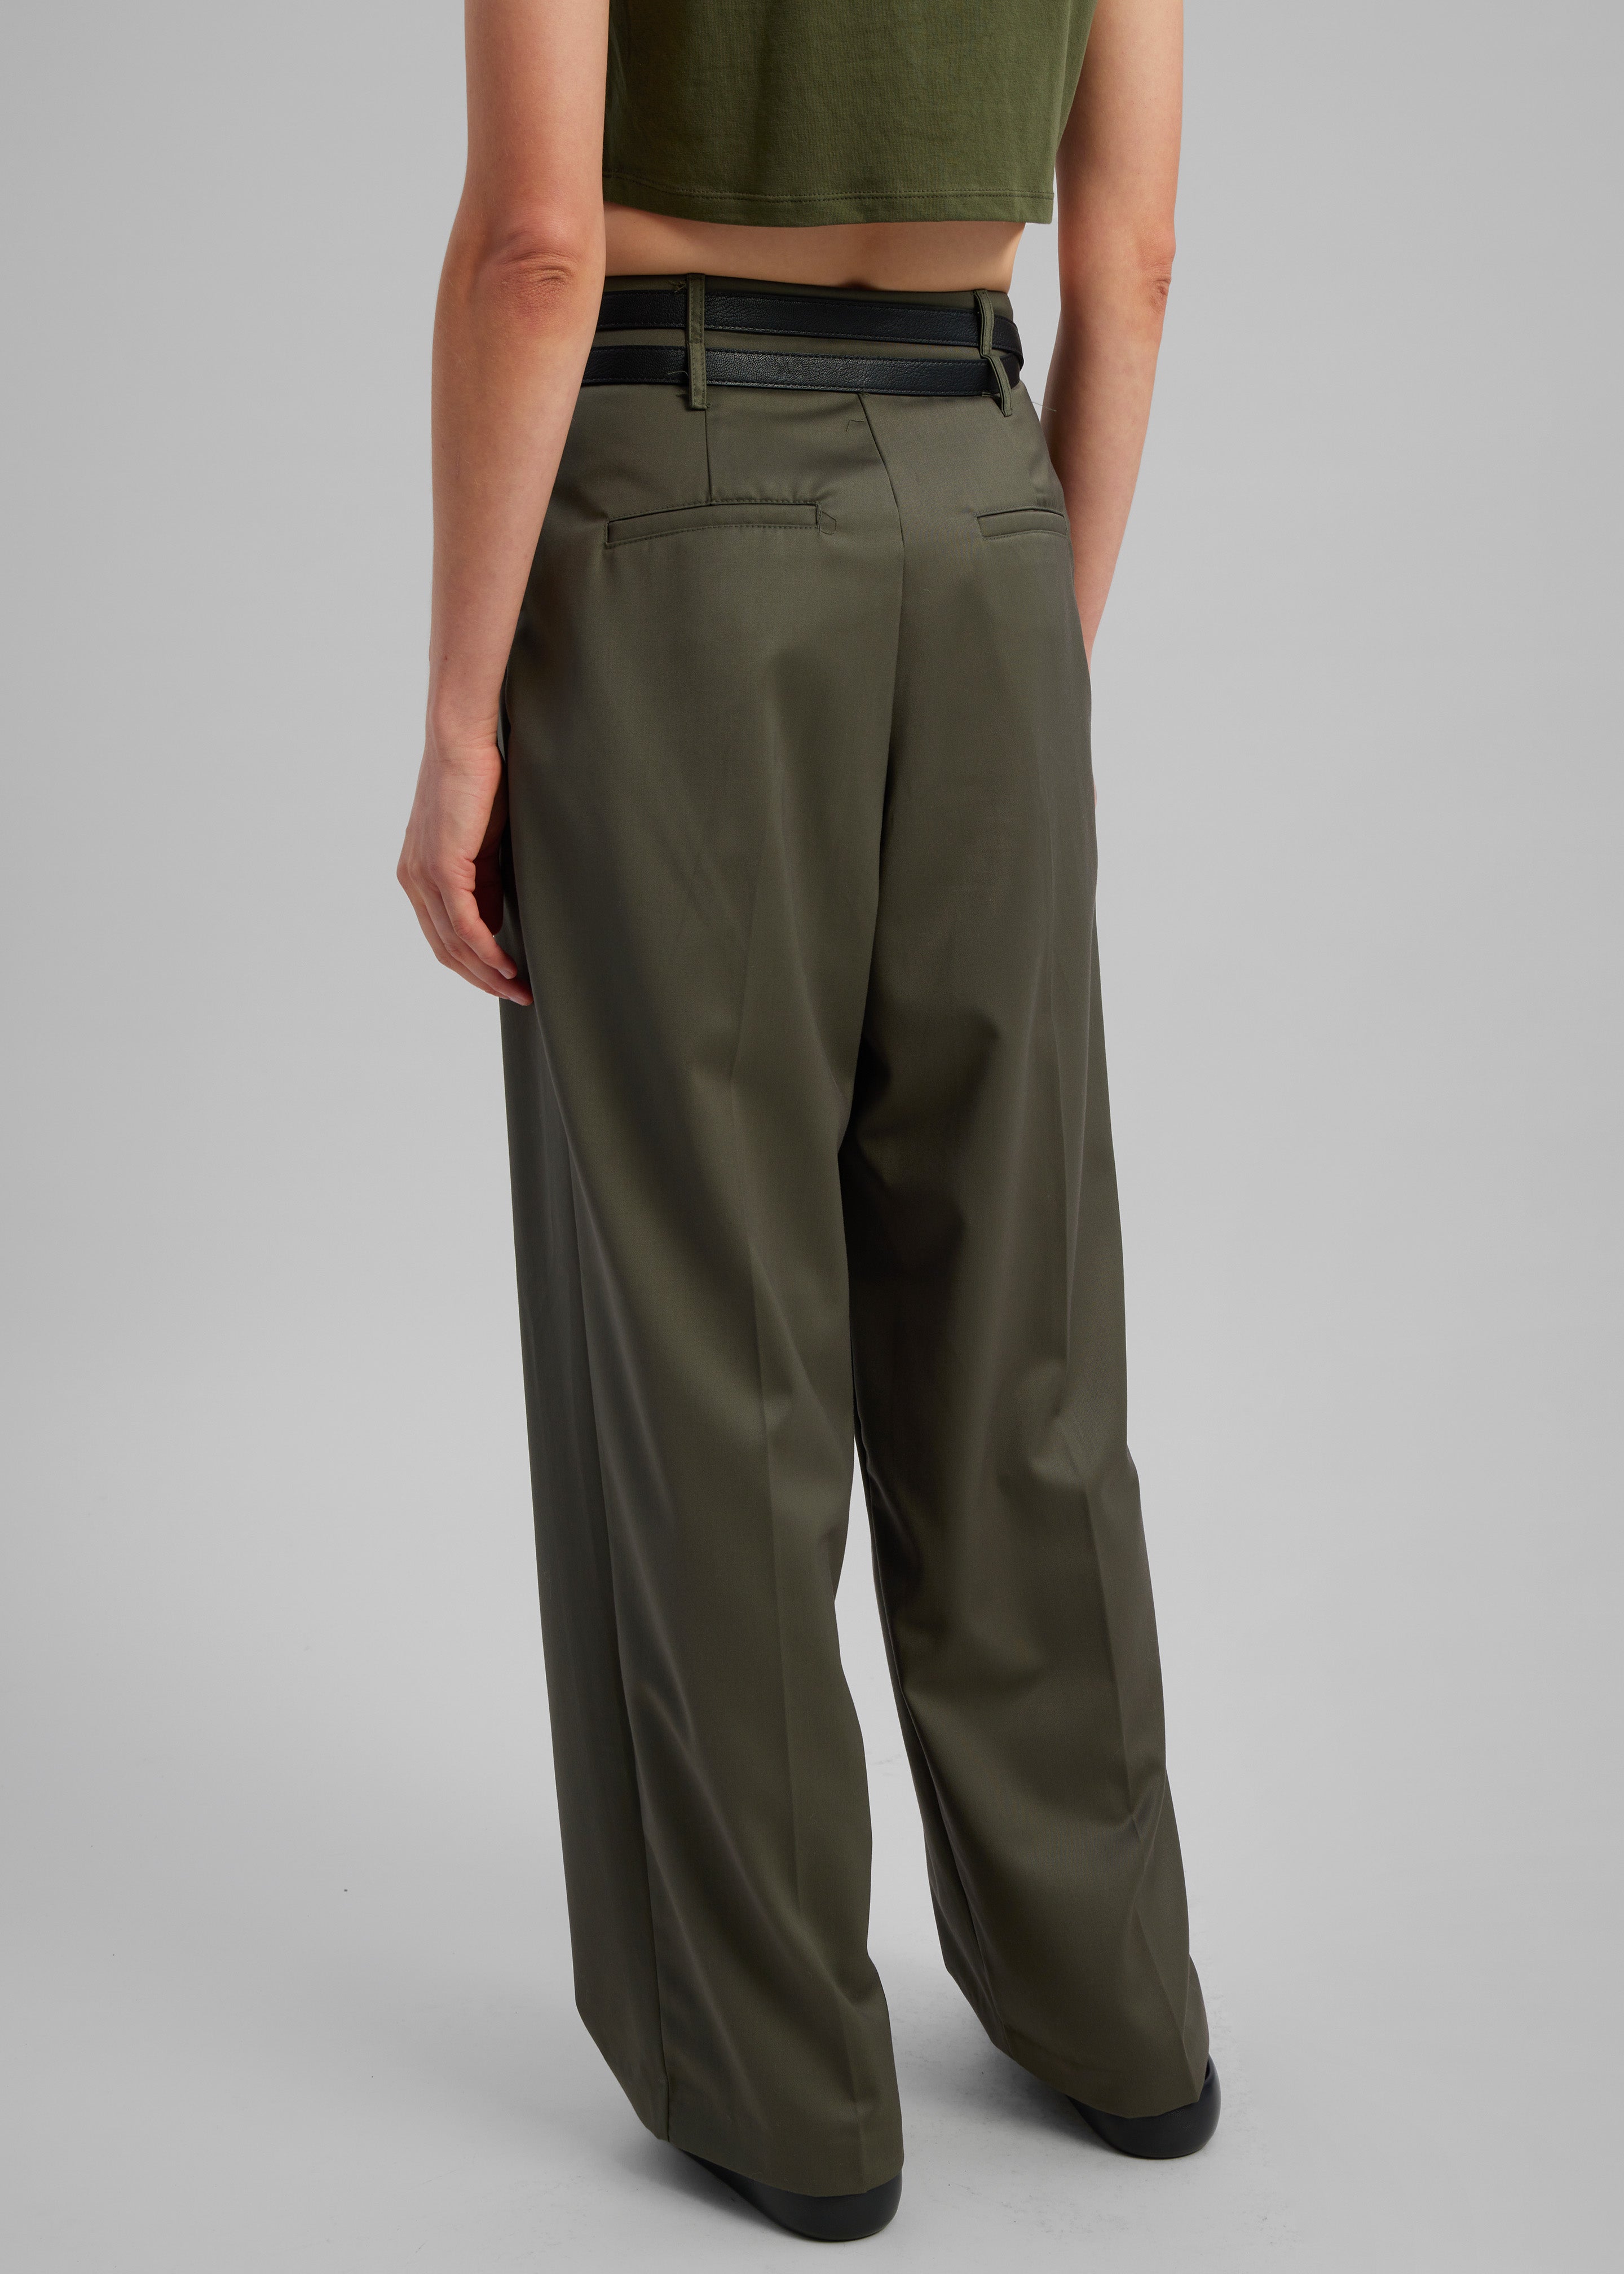 Nellie Belted Pleated Pants - Olive - 10